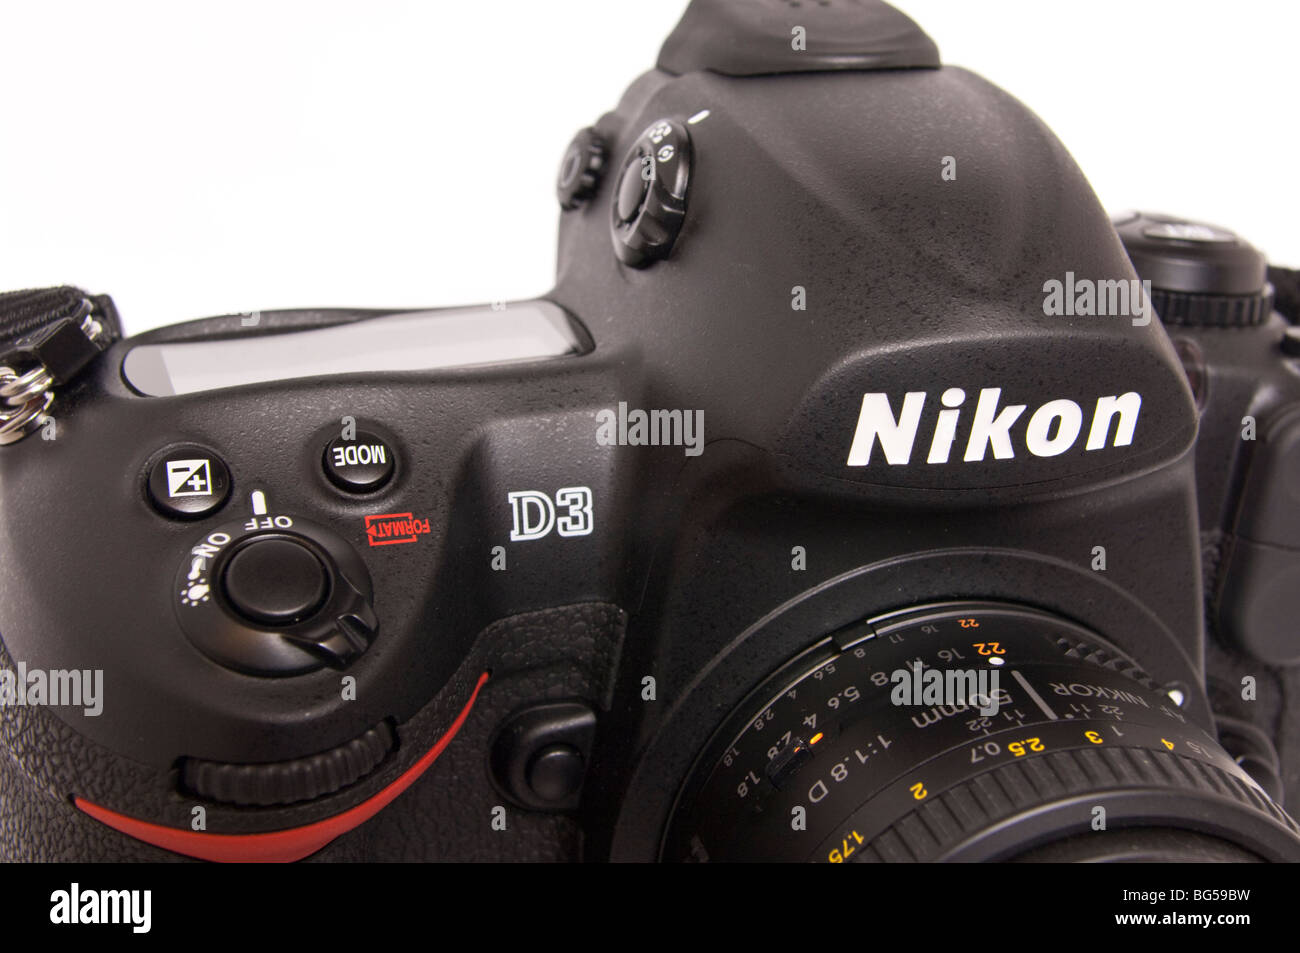 A Nikon D3 digital DSLR full frame (FX) flagship model professional camera with 50mm lens attatched on a white background Stock Photo